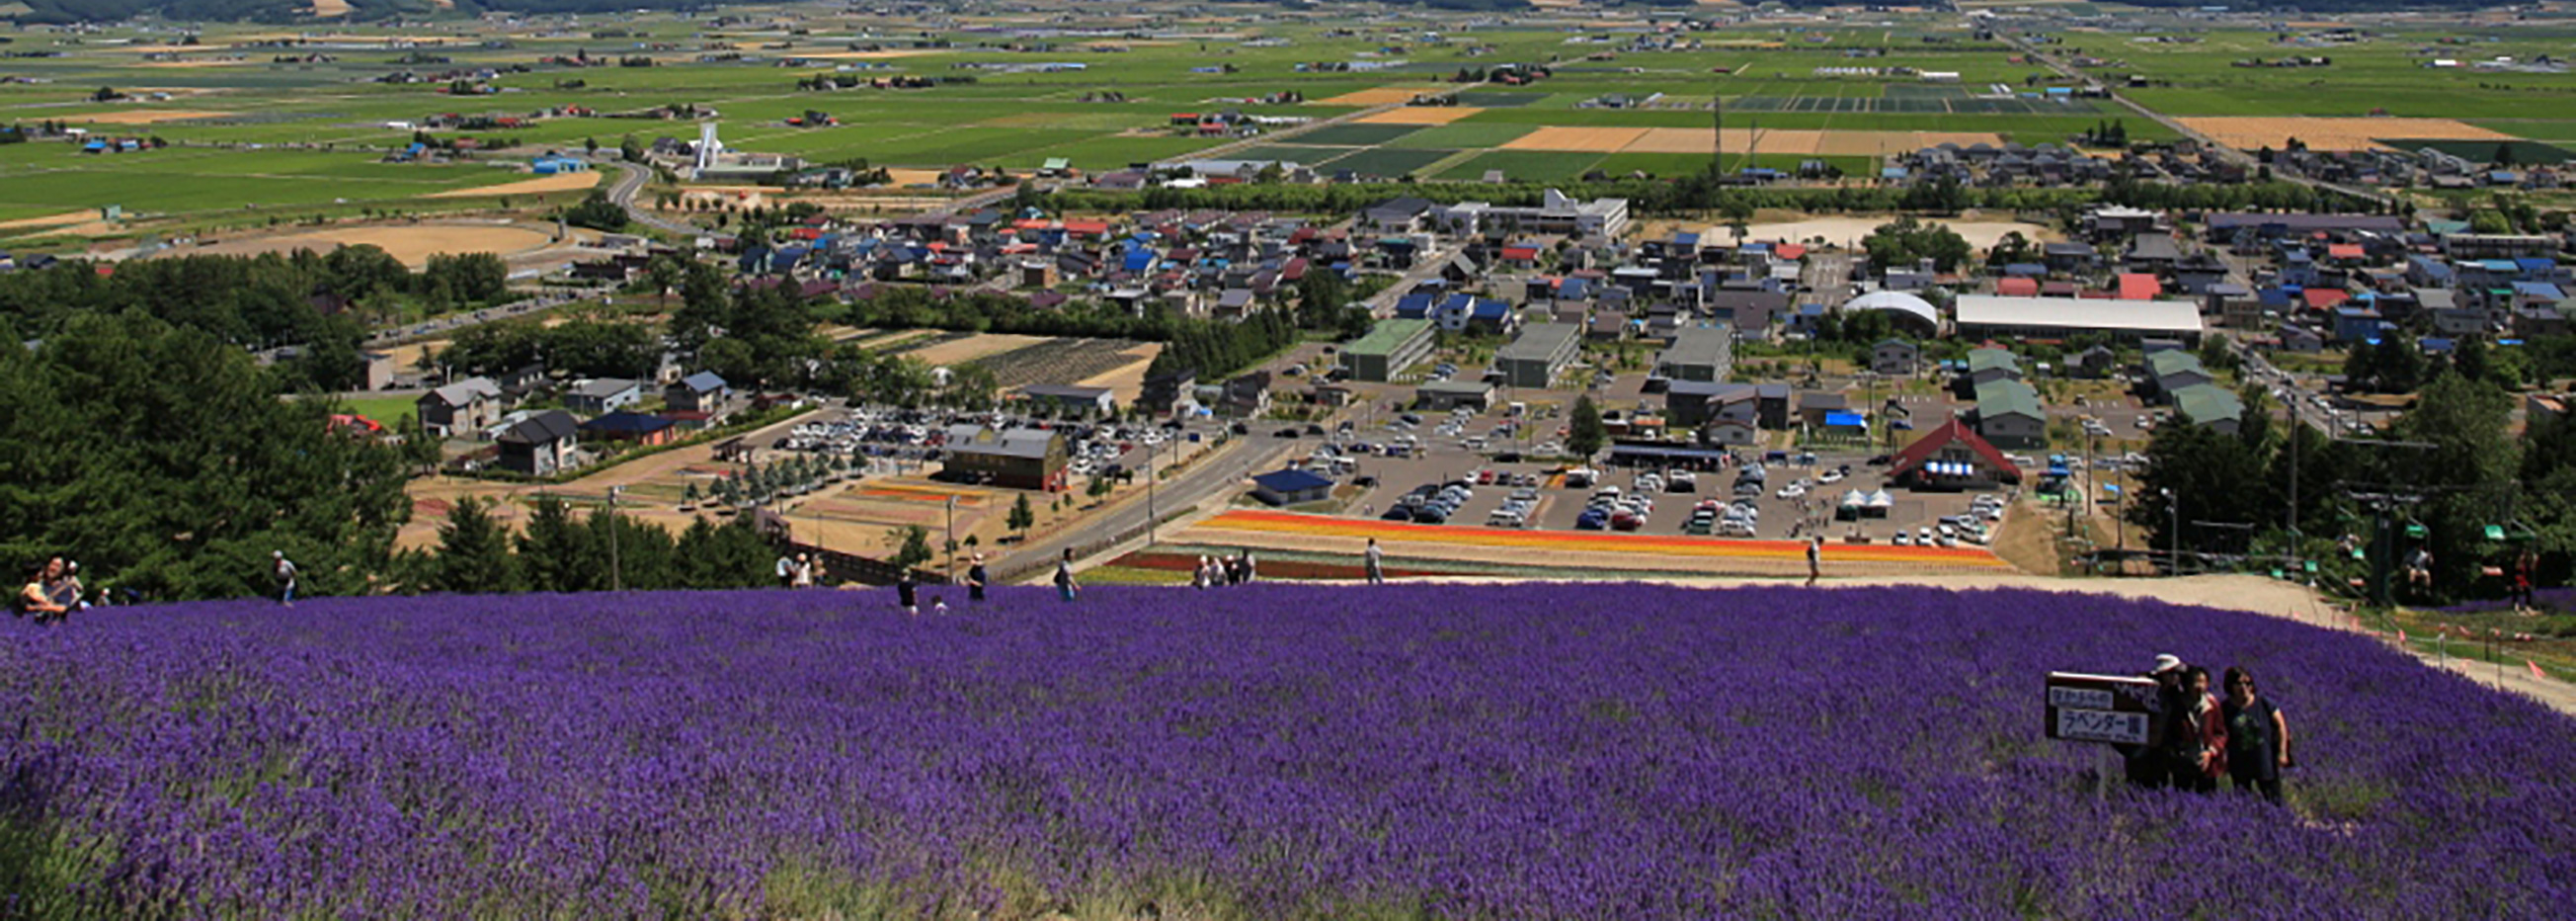 Enjoy a day filled with visiting 3 lavender gardens